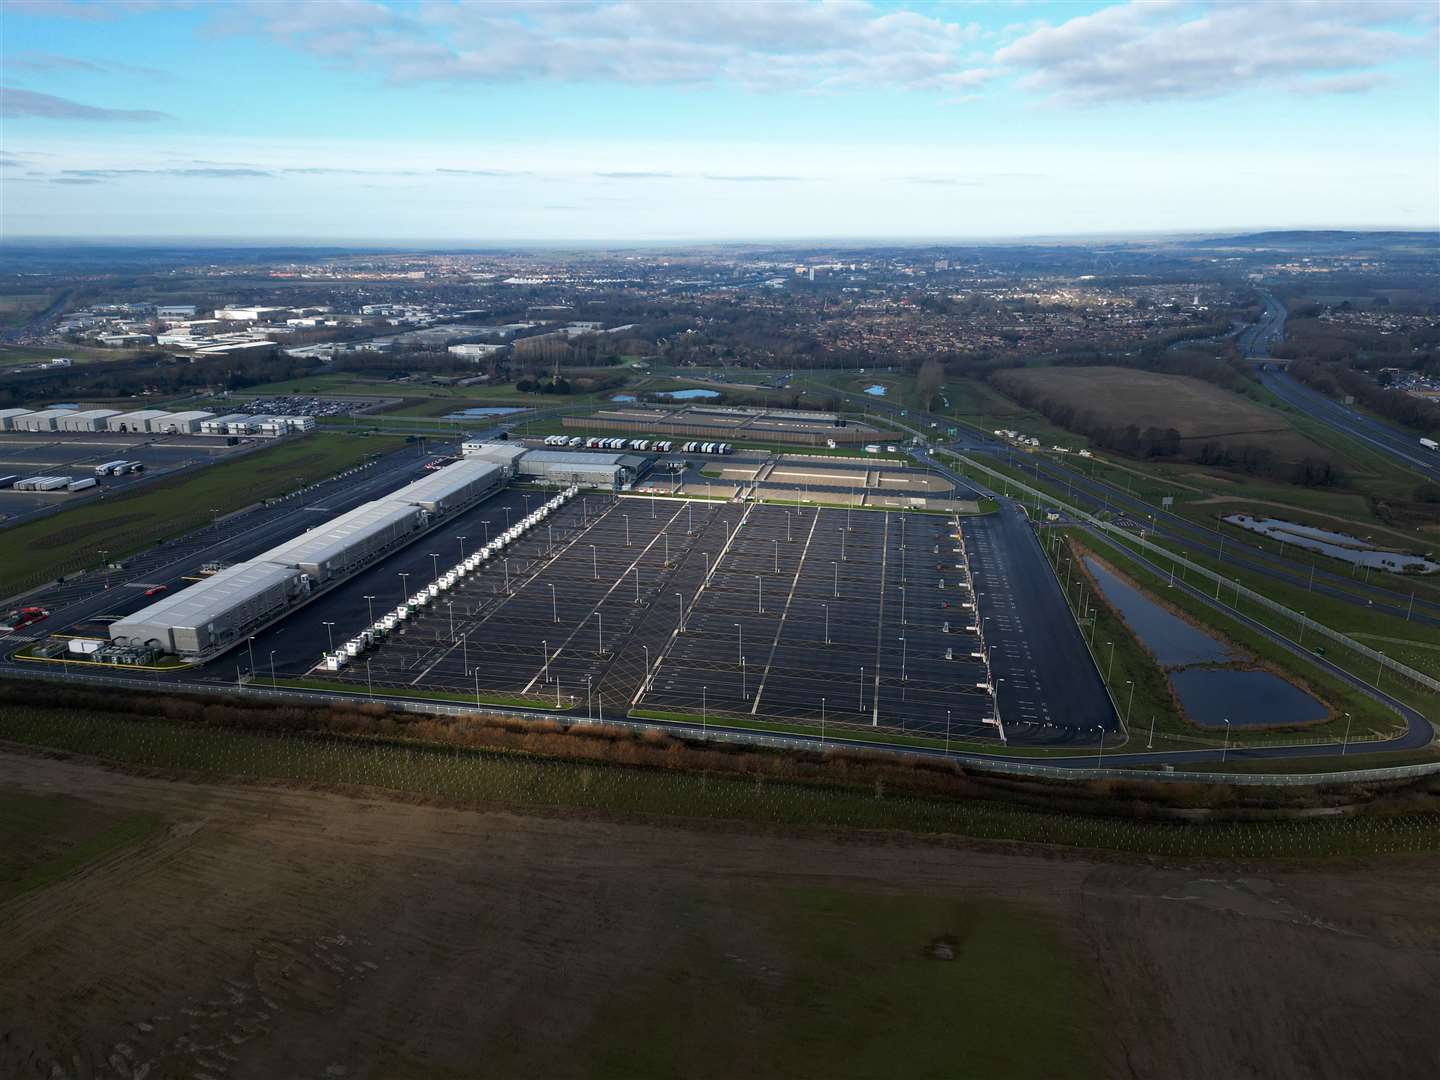 Ashford council hired twice as many staff for the Sevington inland border facility near Ashford than government officials recommended. Picture: Barry Goodwin